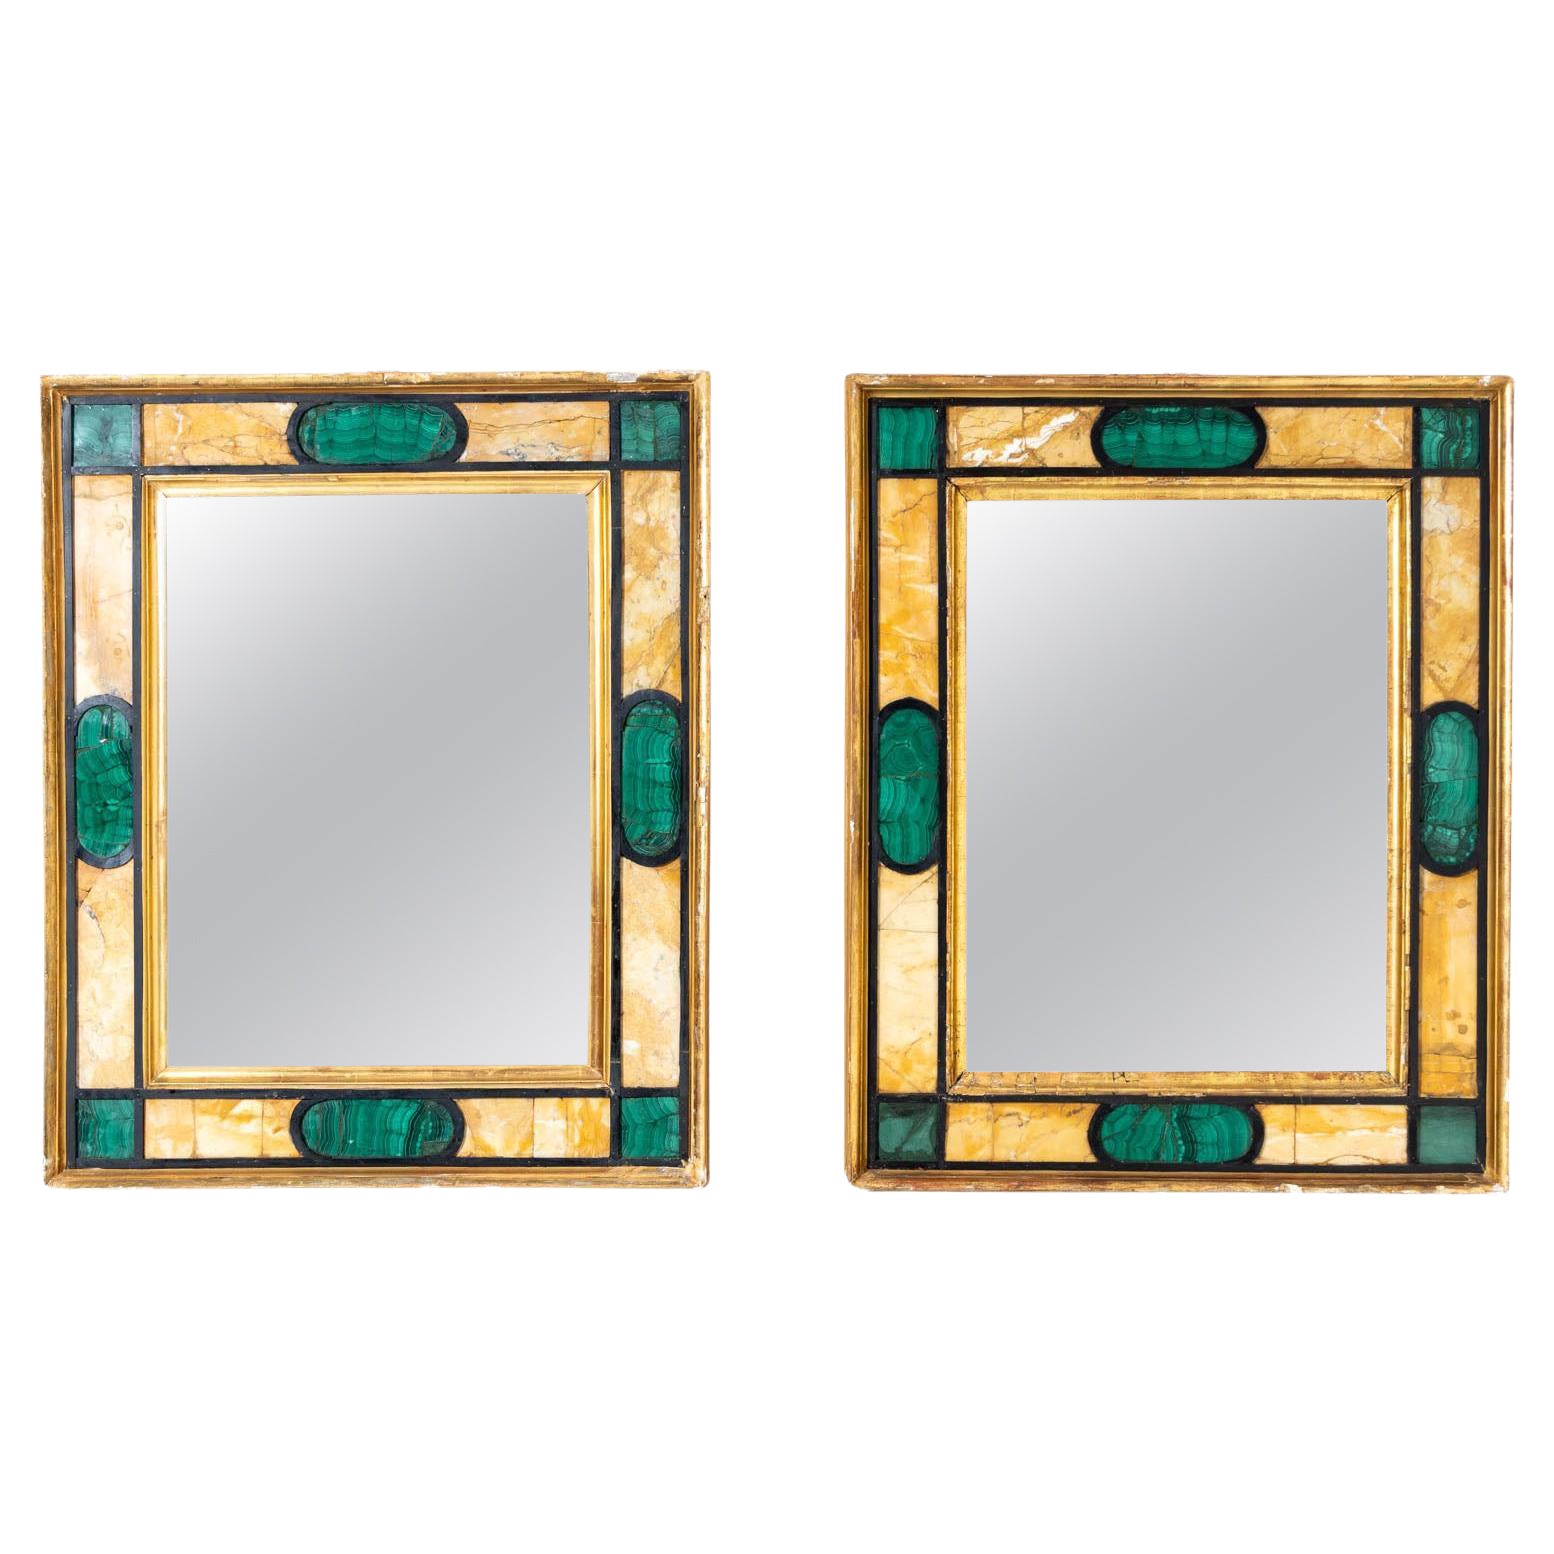 Pair of Wall Mirrors in Giallo Siena and Malachite, Italy 18th Century For Sale